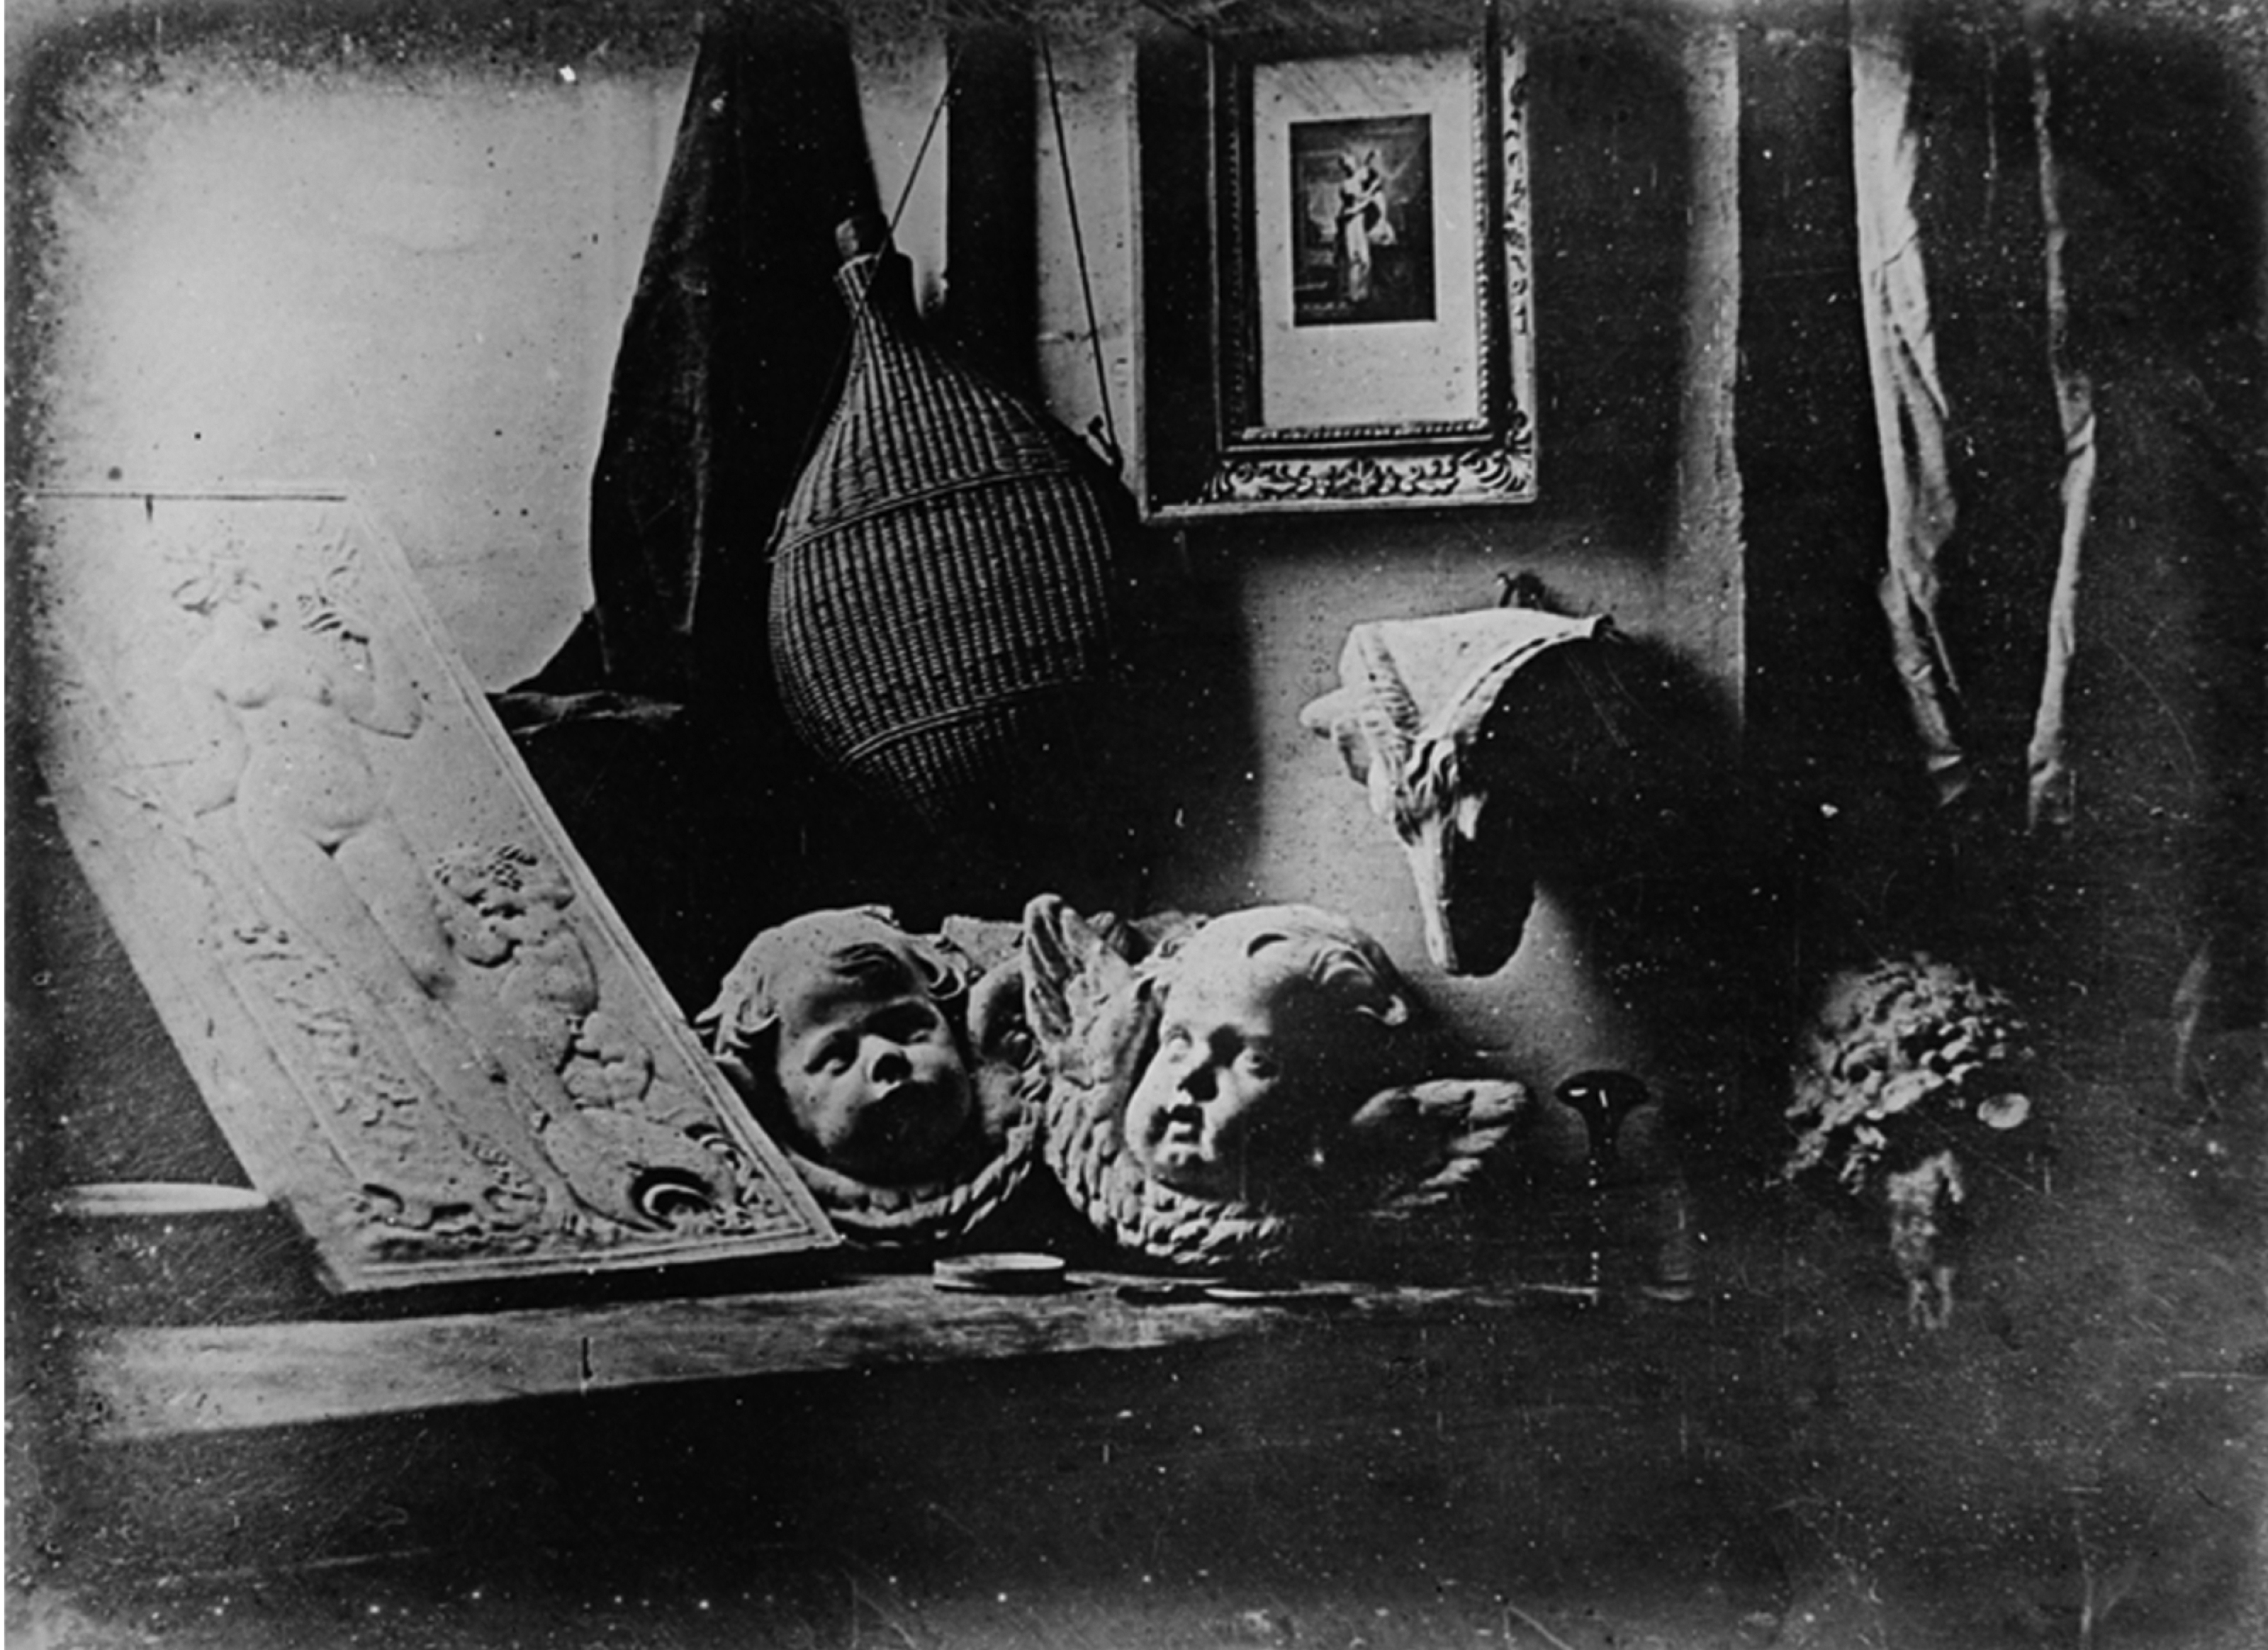 Black and white photograph of objects on a table and hanging from a wall.